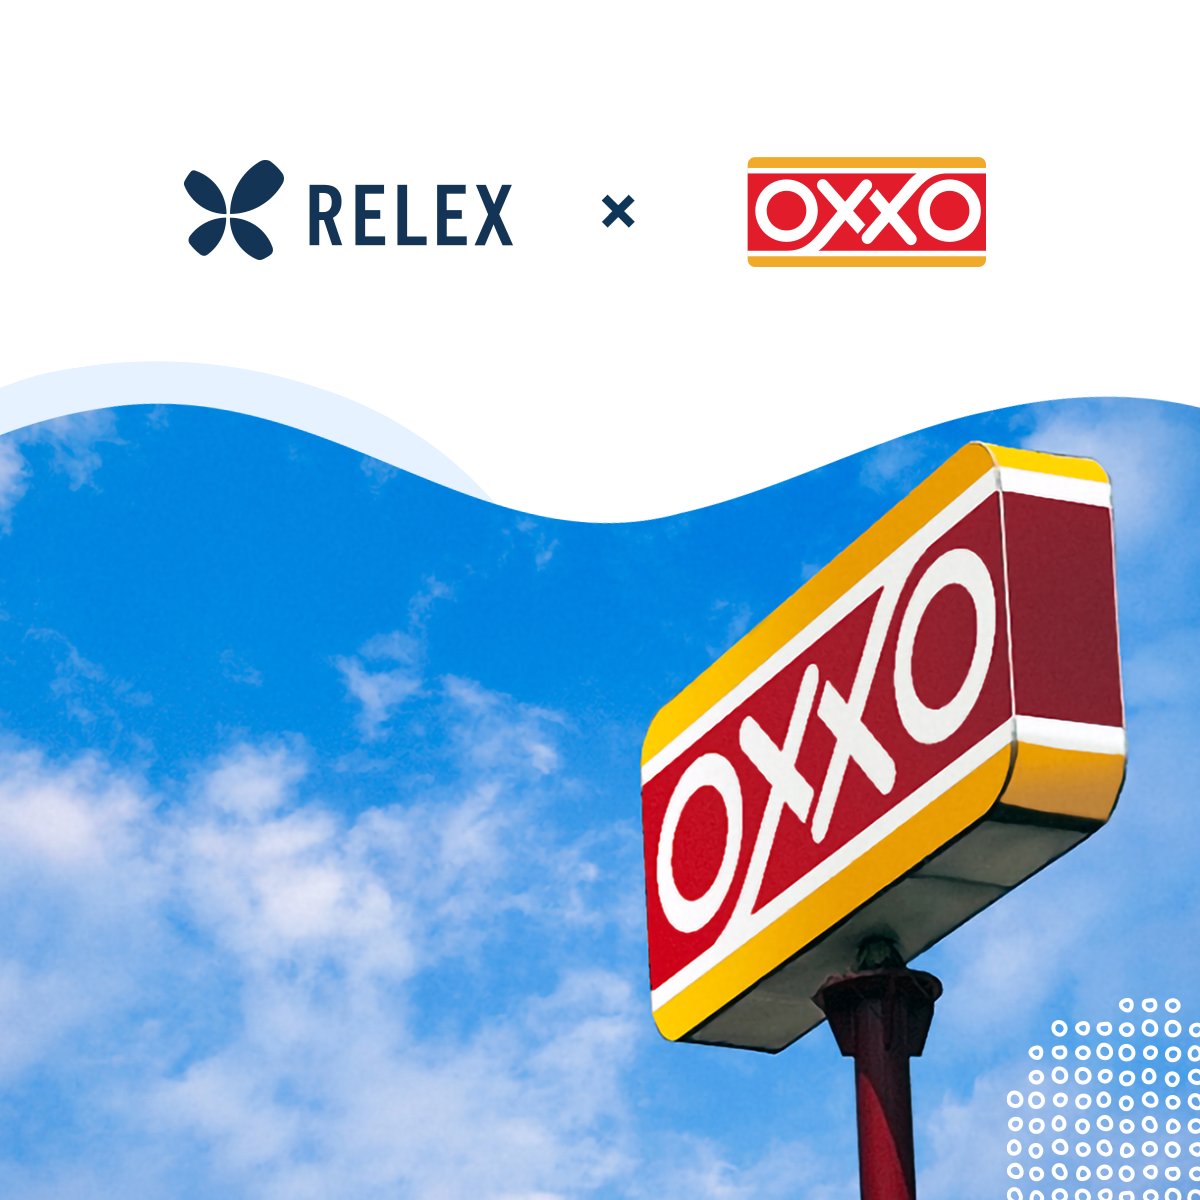 OXXO LATAM, the largest convenience store chain in the Americas, has chosen RELEX to optimize their forecasting and replenishment processes. This move aims to enhance their retail operations in Latin America as they scale internationally. relexsolutions.com/news/oxxo-inte…